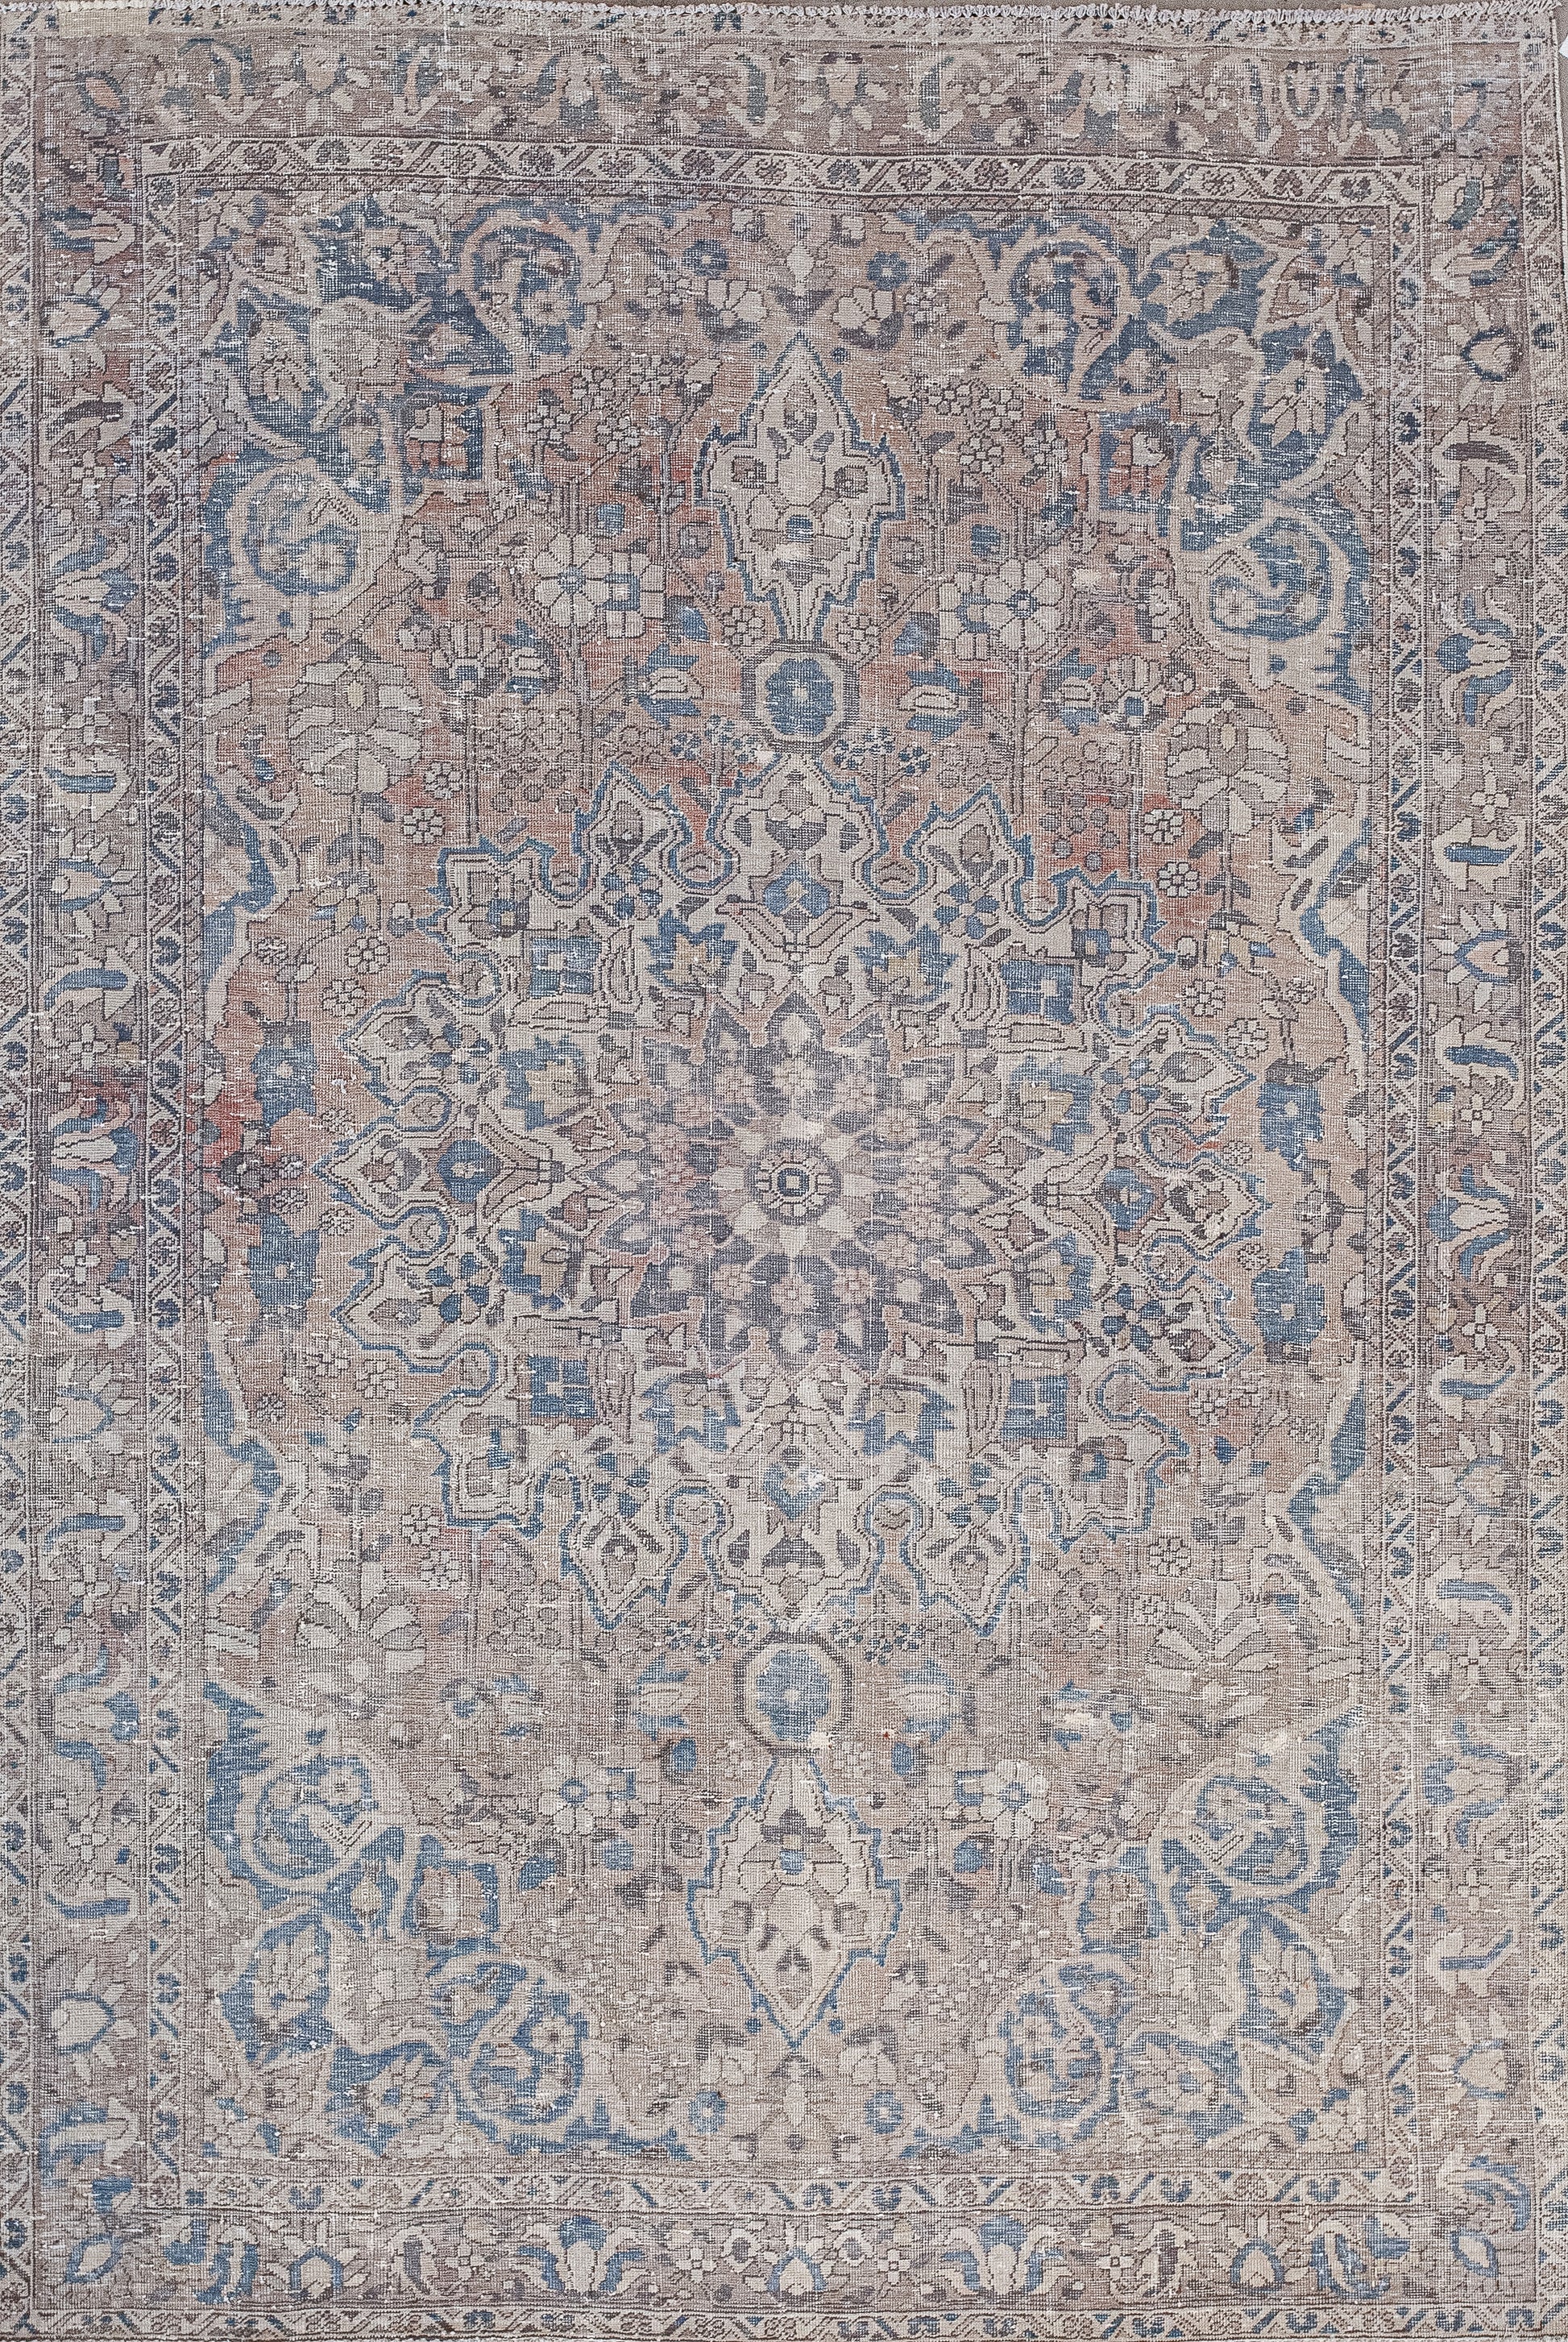 This serene rug was woven to convey discreet emotional transmissions. The quiet color scheme has hues in blue, brown, and gray.